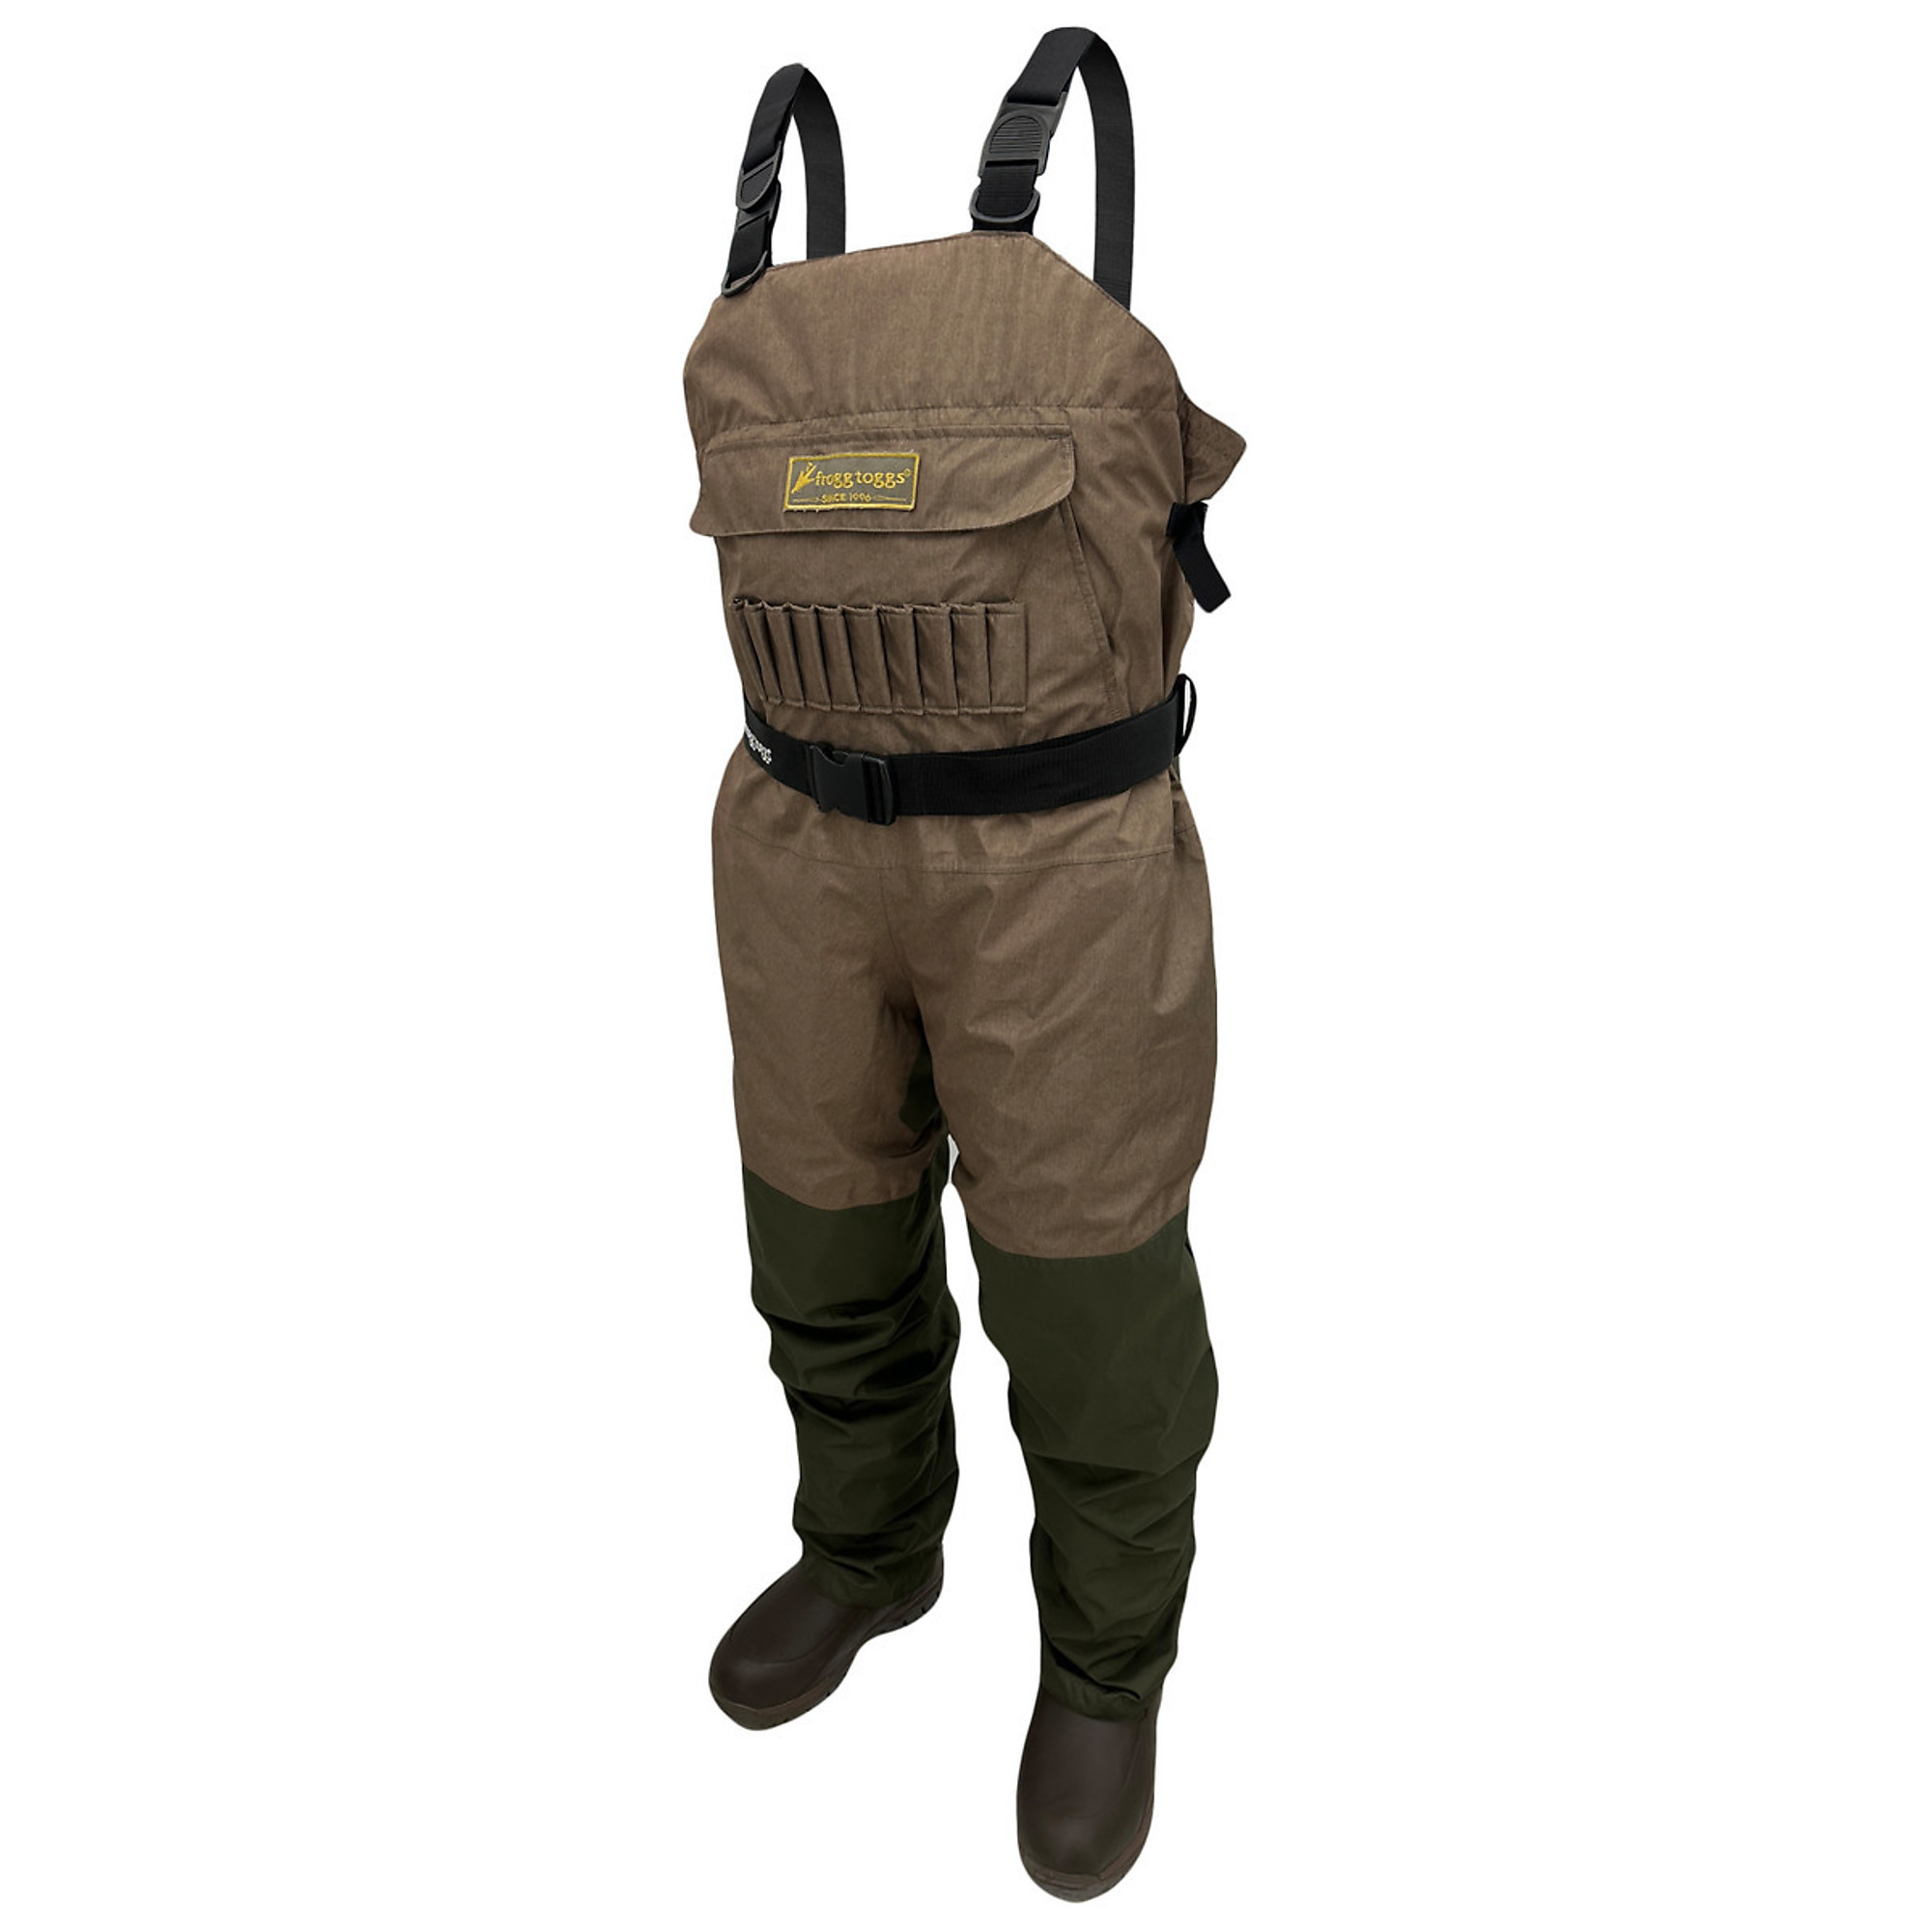 frogg toggs, Men's Traditions Refuge 3.0 Wader, Size 10, Width